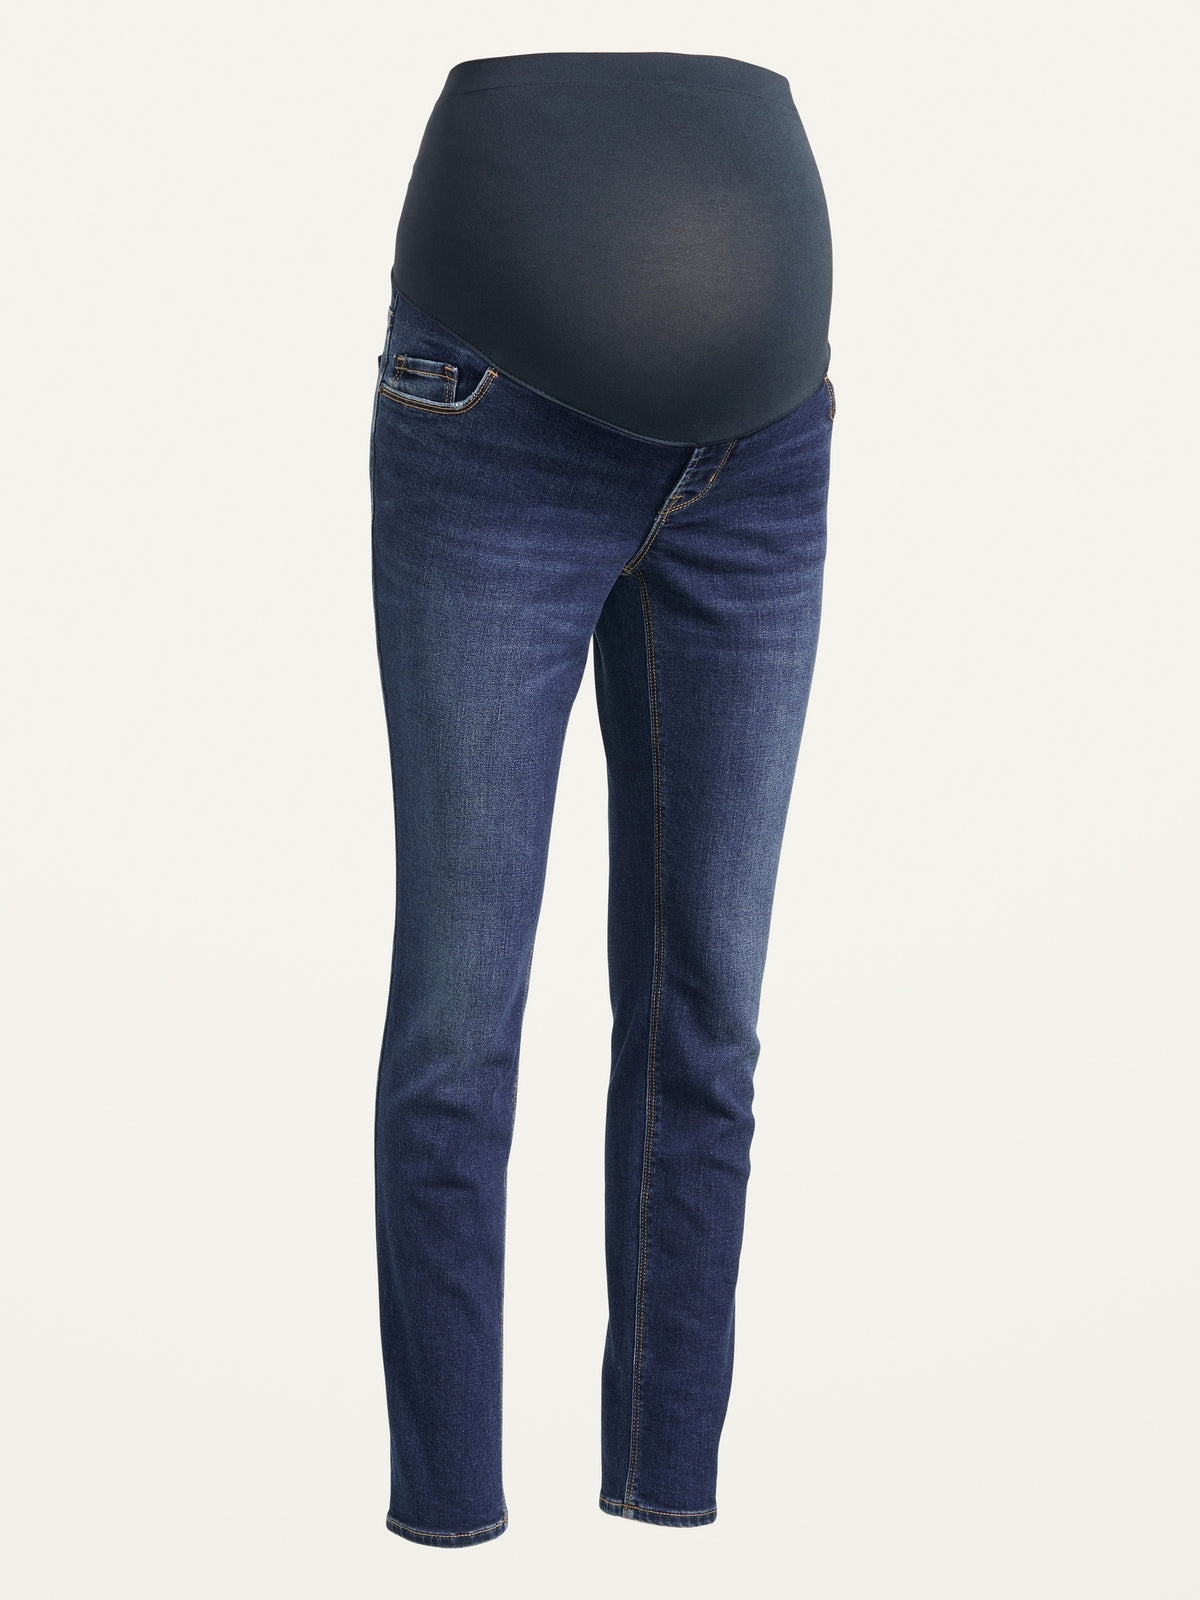 Maternity Bottoms - Old Navy Philippines